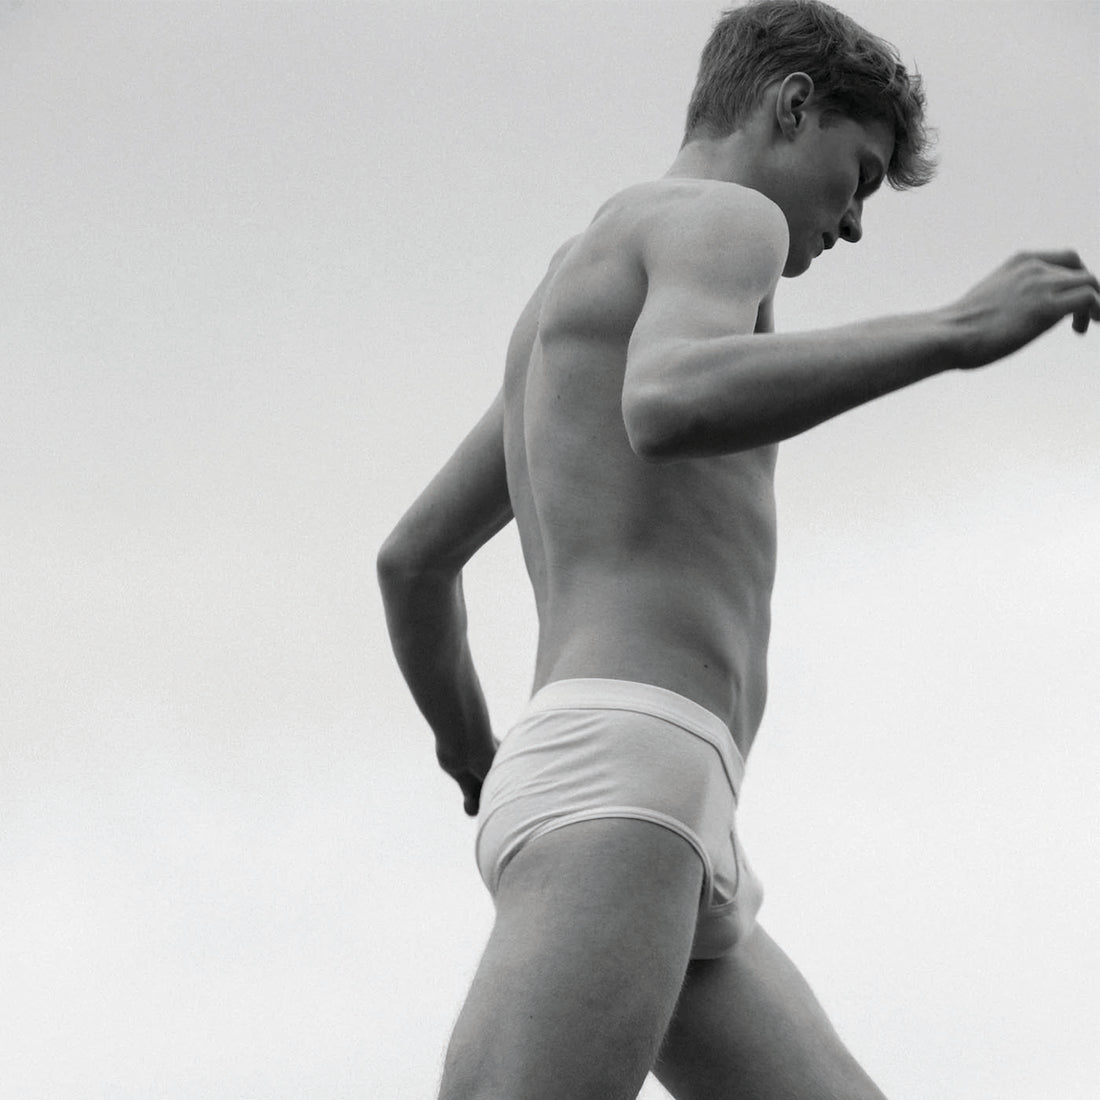 Black and white image of a person wearing white underwear, captured from a low angle against a cloudy sky background.